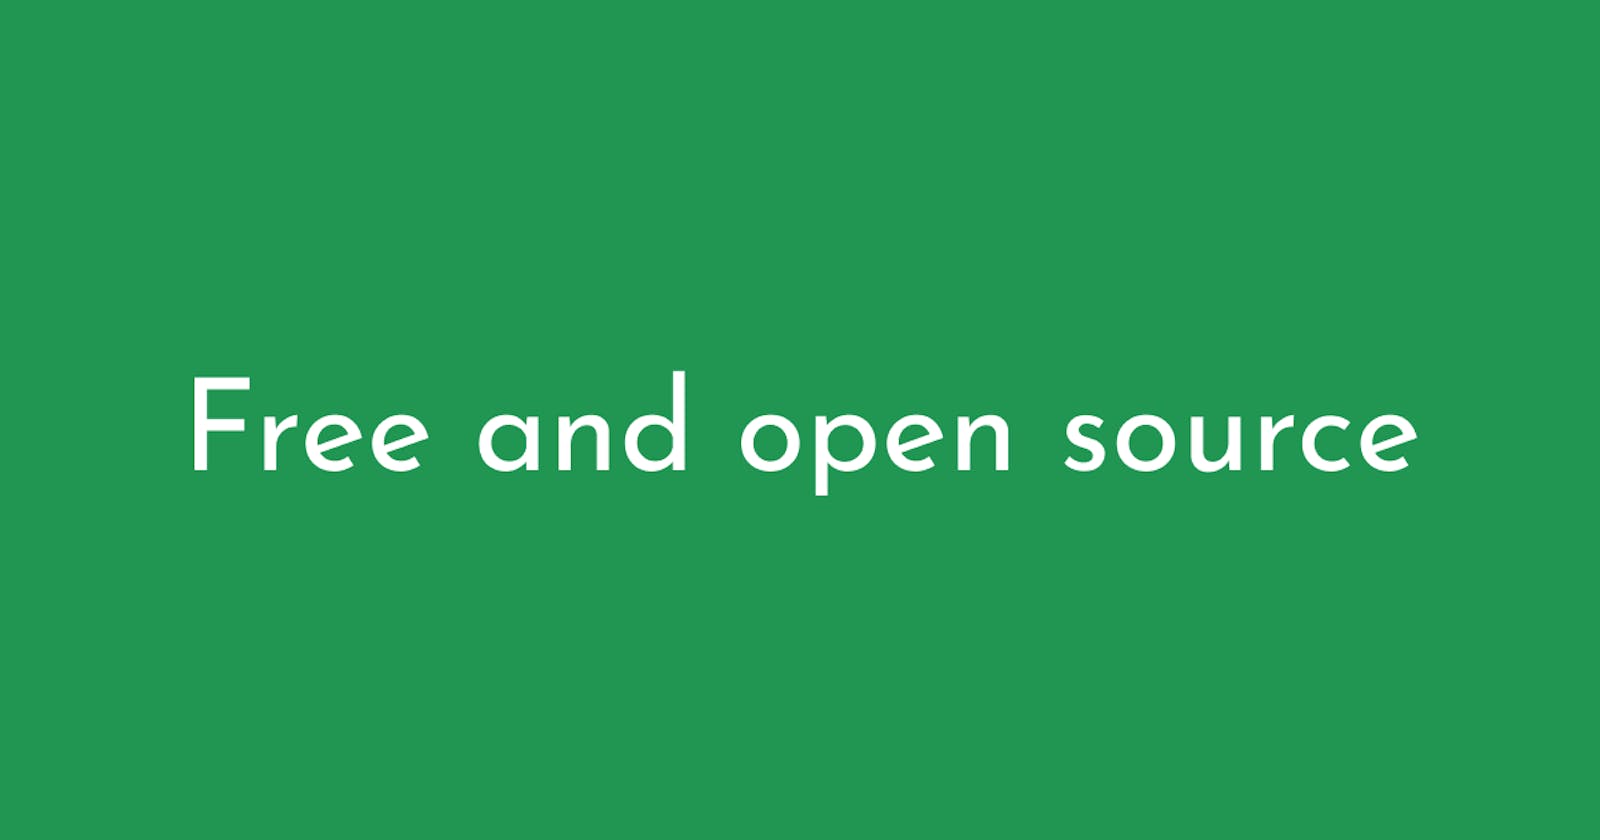 What does "free and open-source" mean?